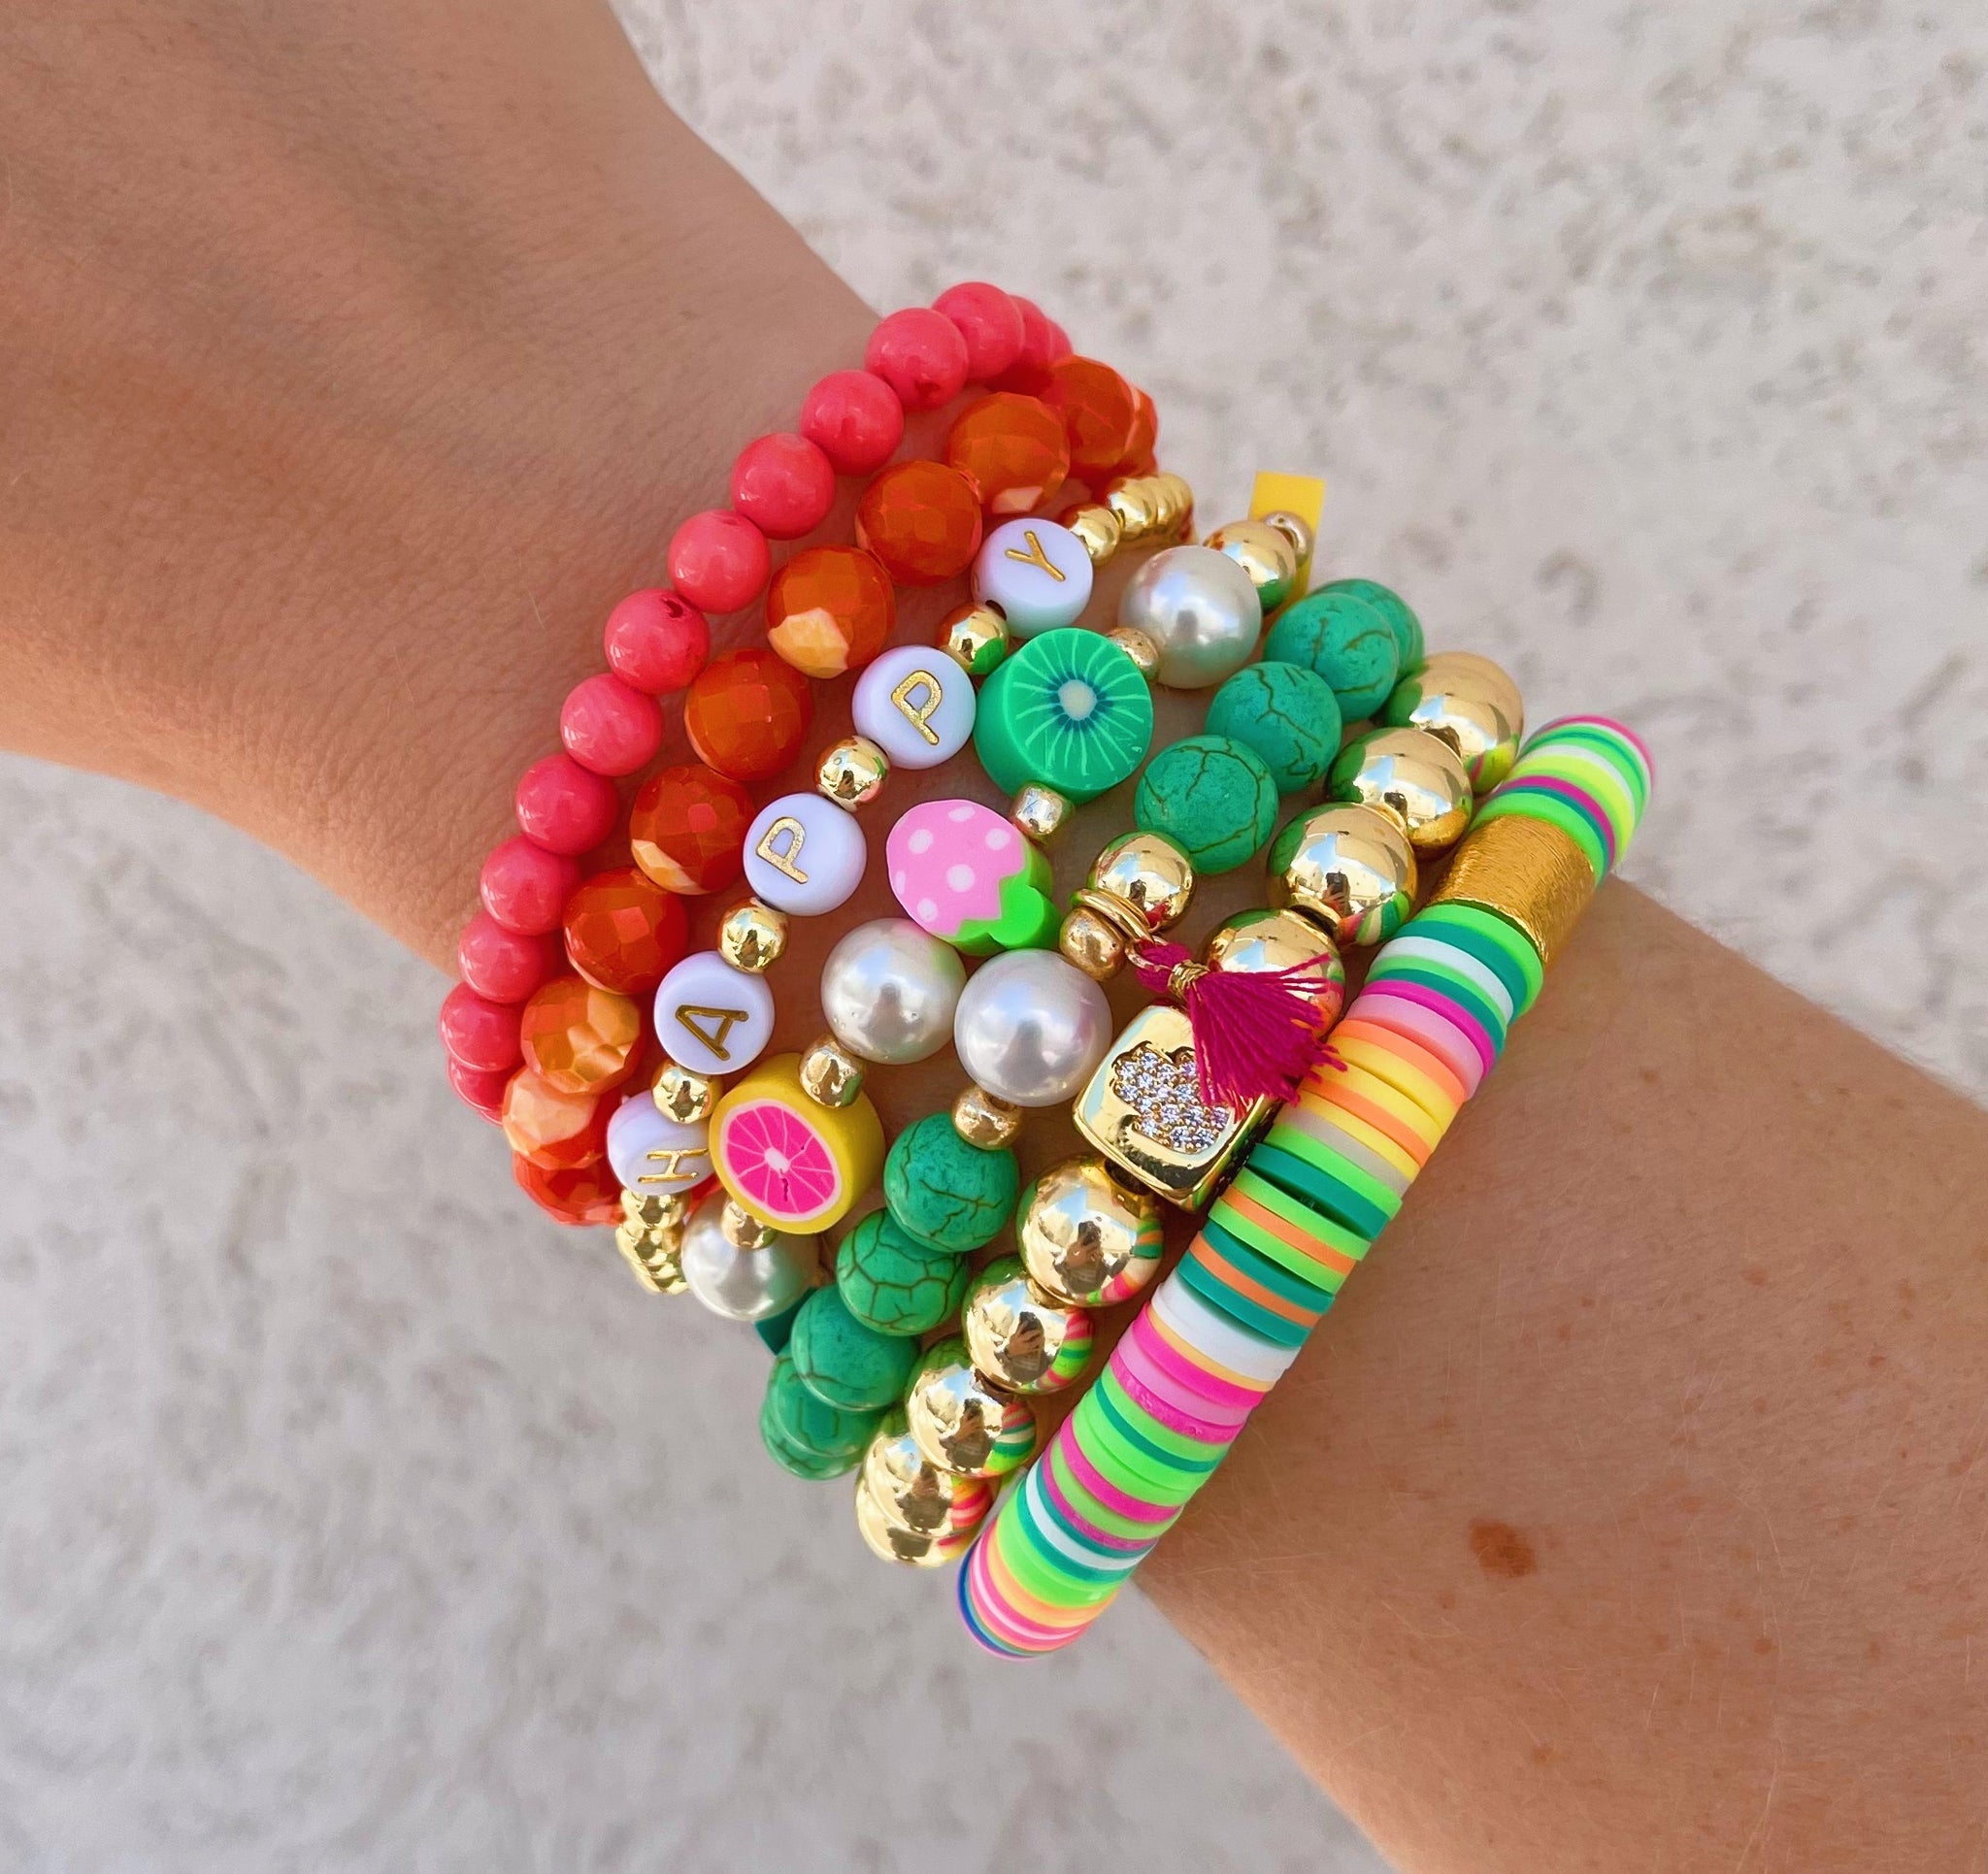 XOCARTIGE Beaded Stretch Bracelets for Women Colorful Clay Fruit